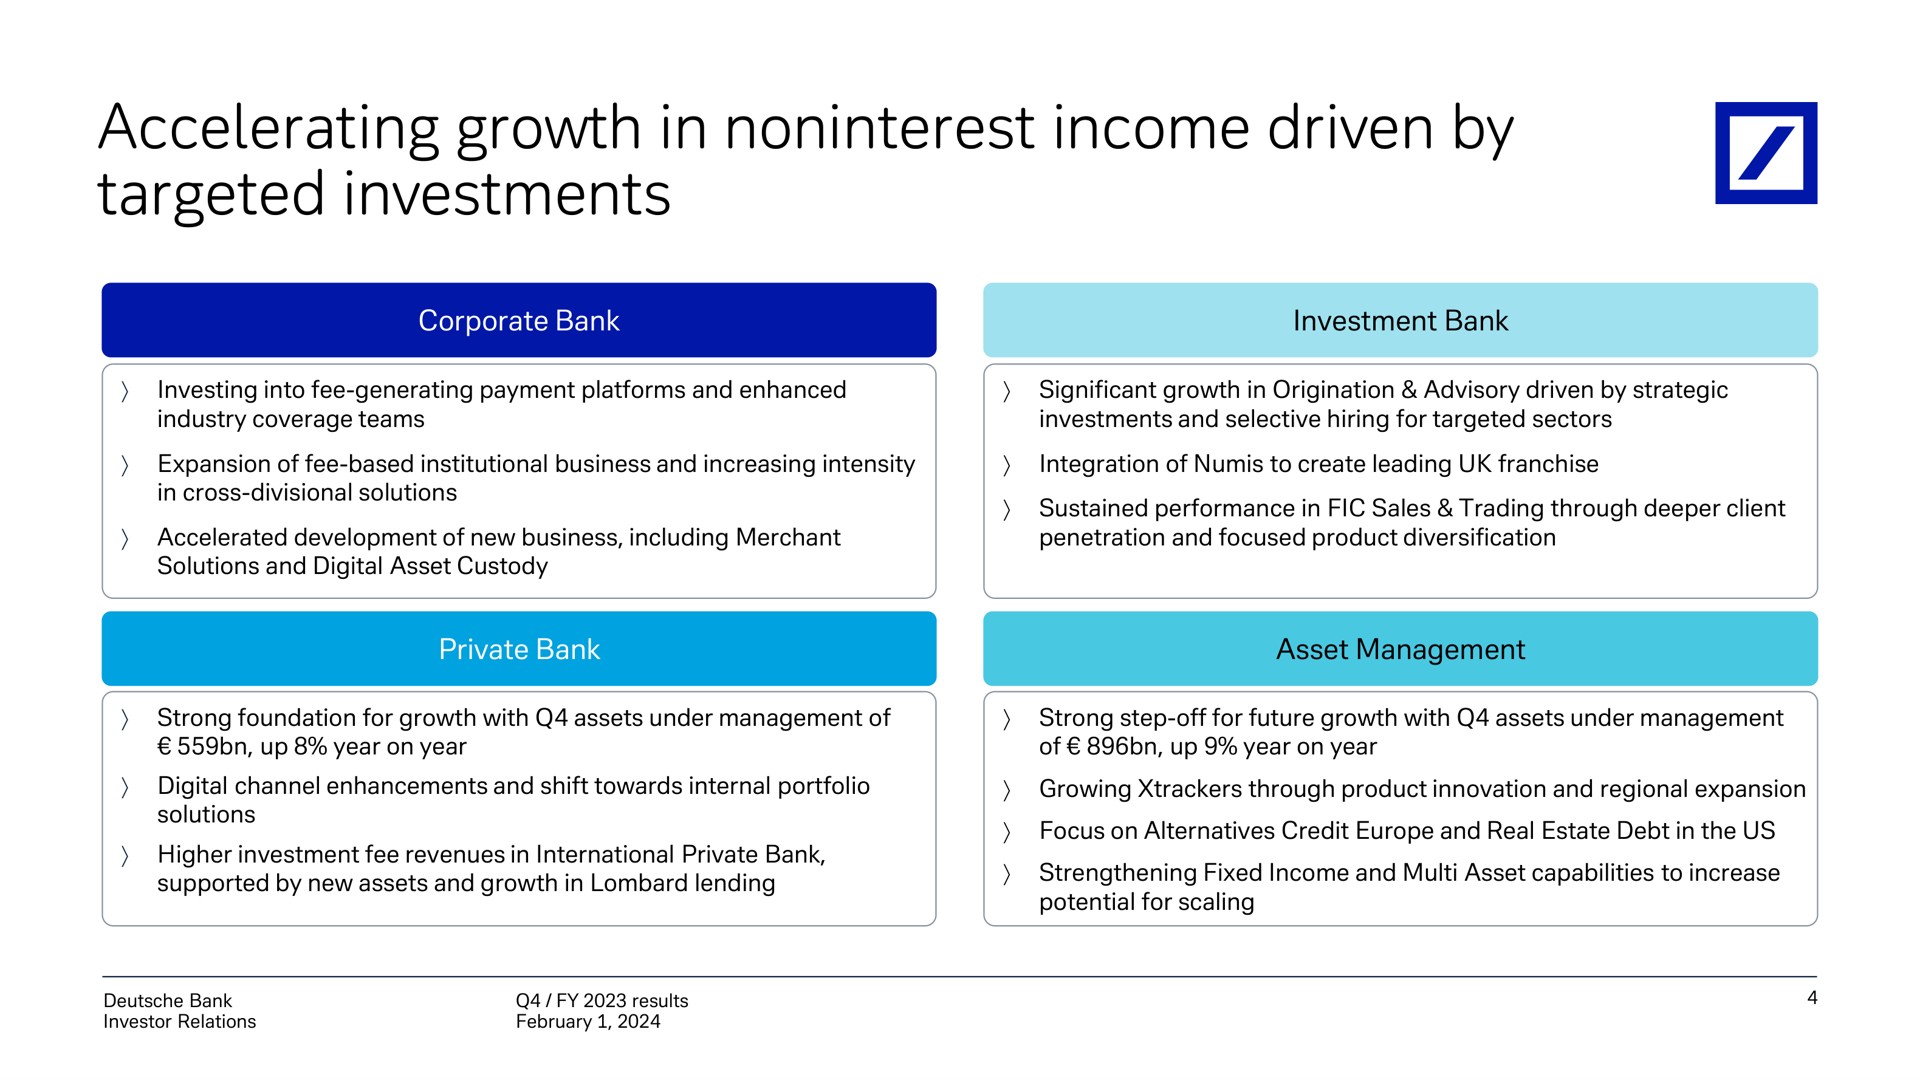 accelerating growth in income driven by targeted investments | Deutsche Bank